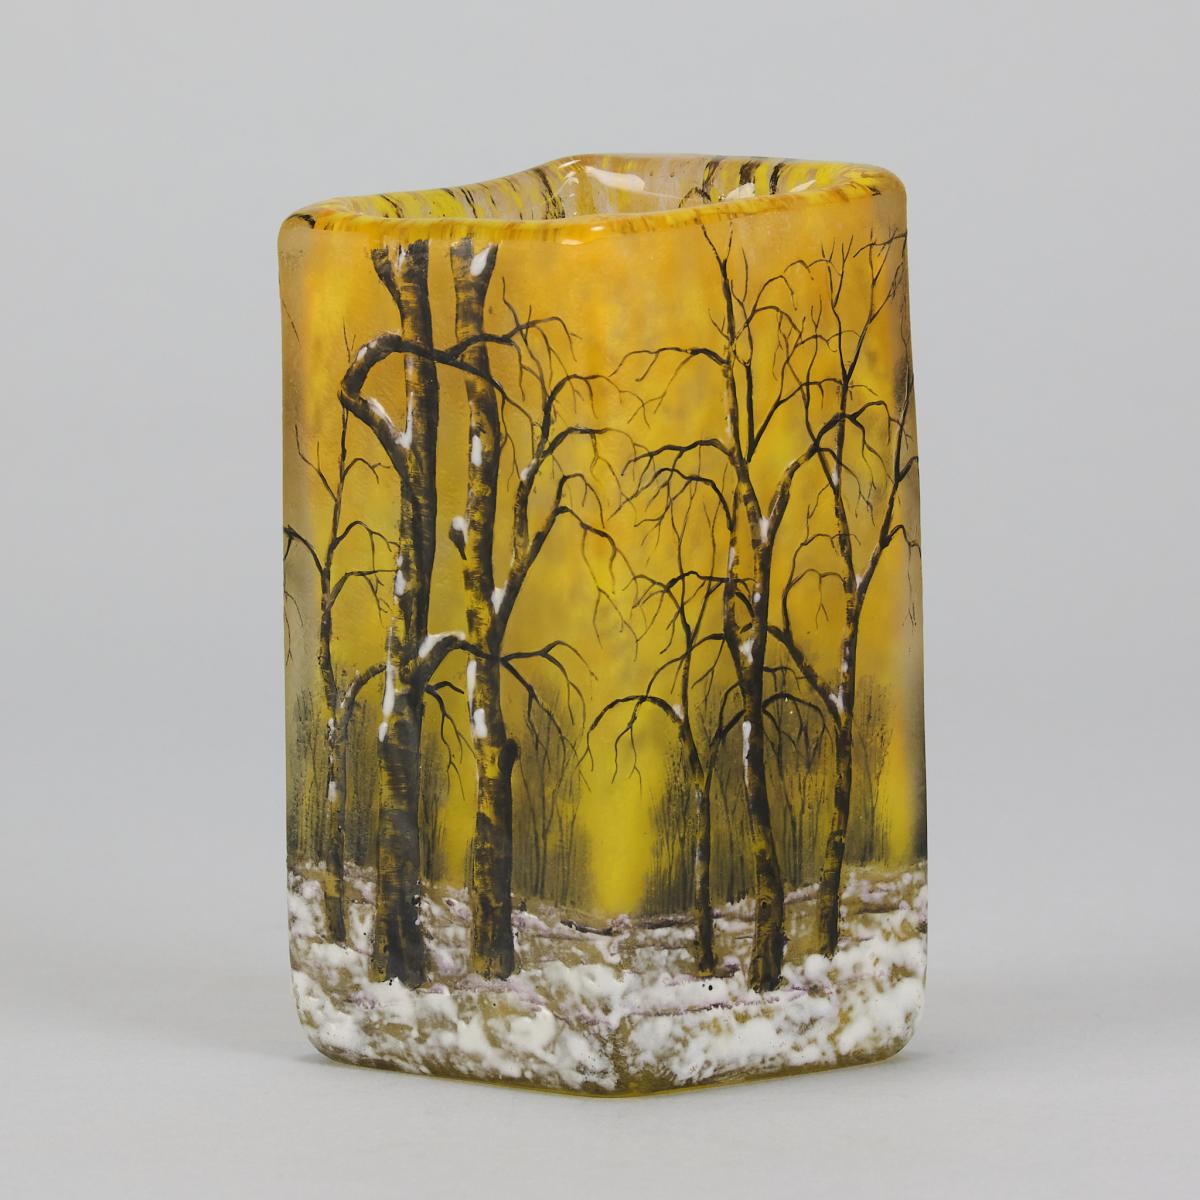 Early 20th Century Vase Entitled "Winter Vase" by Daum Frères, Circa 1900